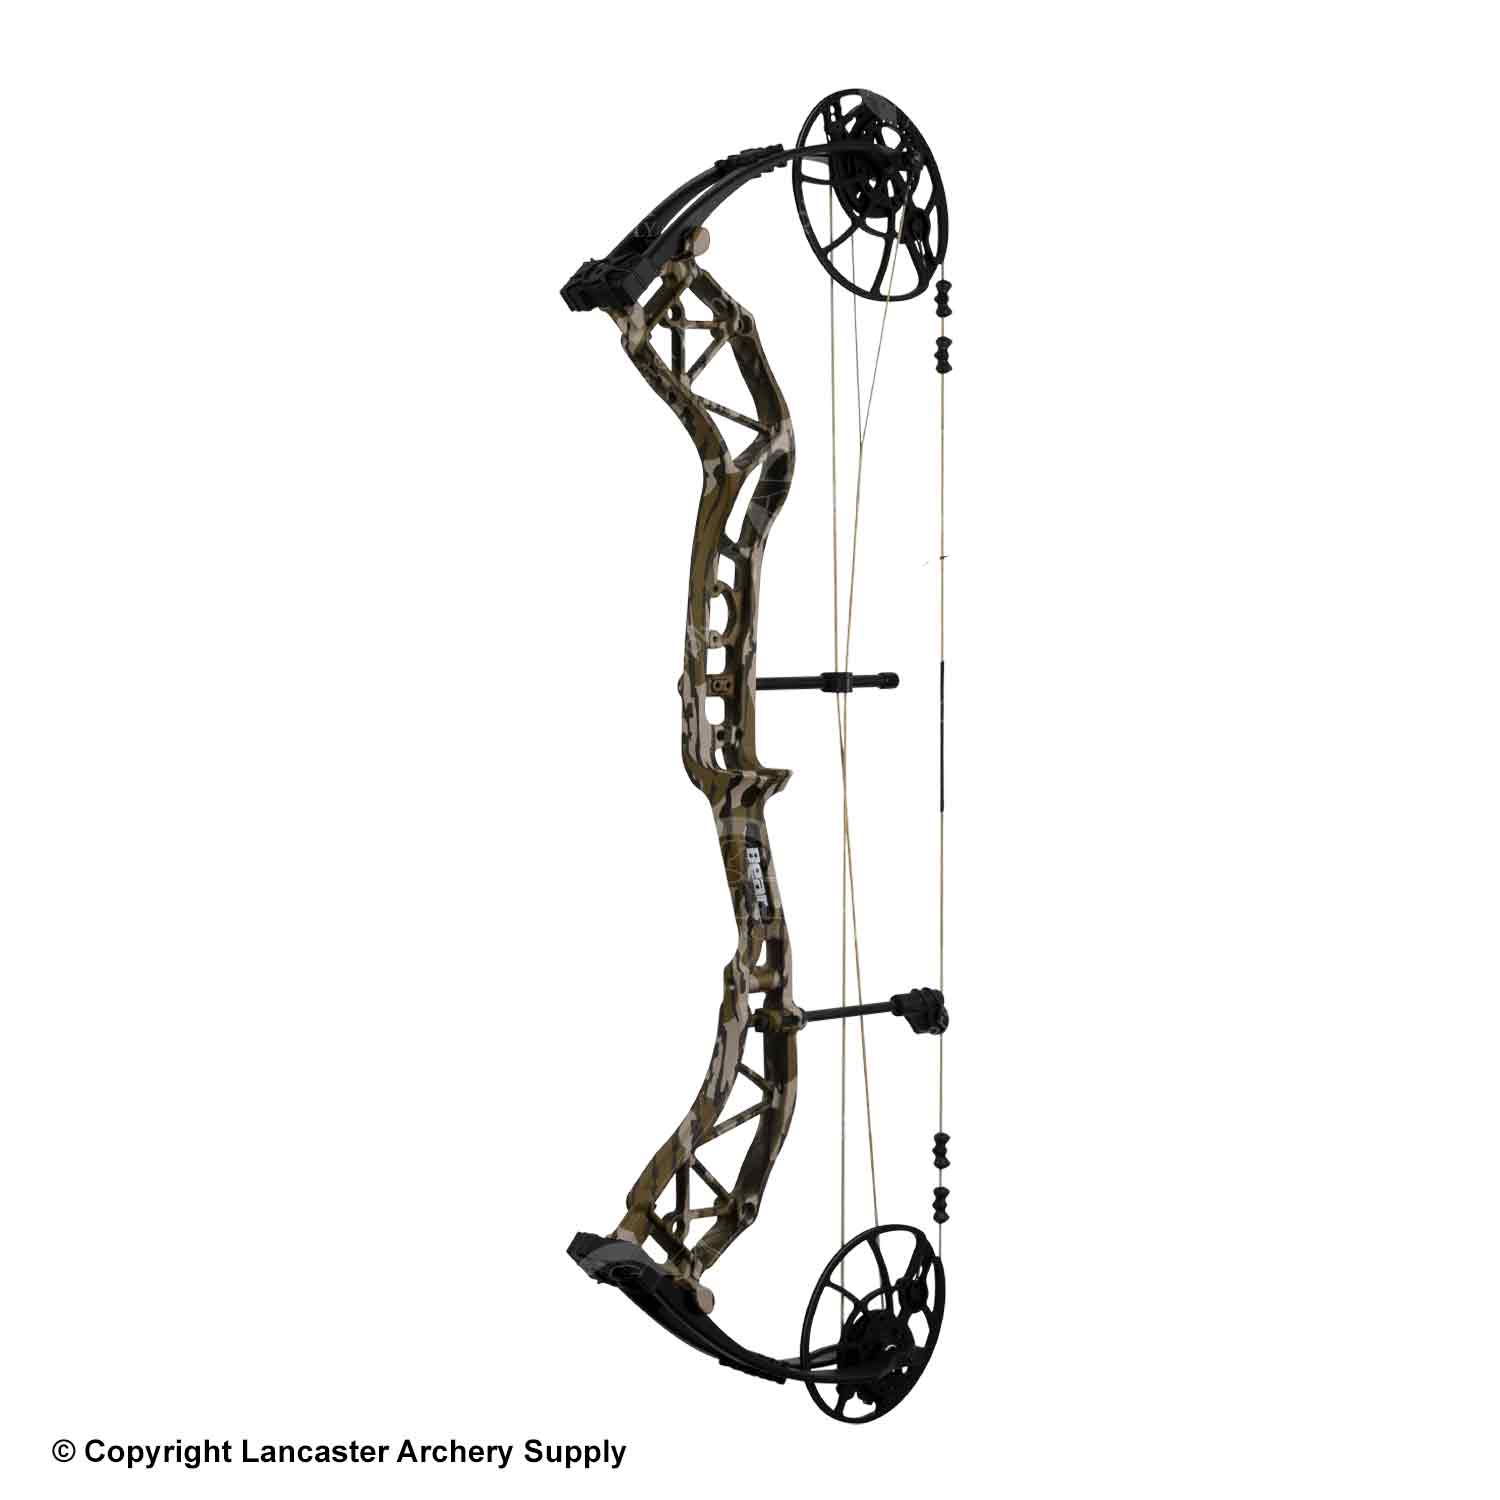 Bear Legend XR Compound Hunting Bow